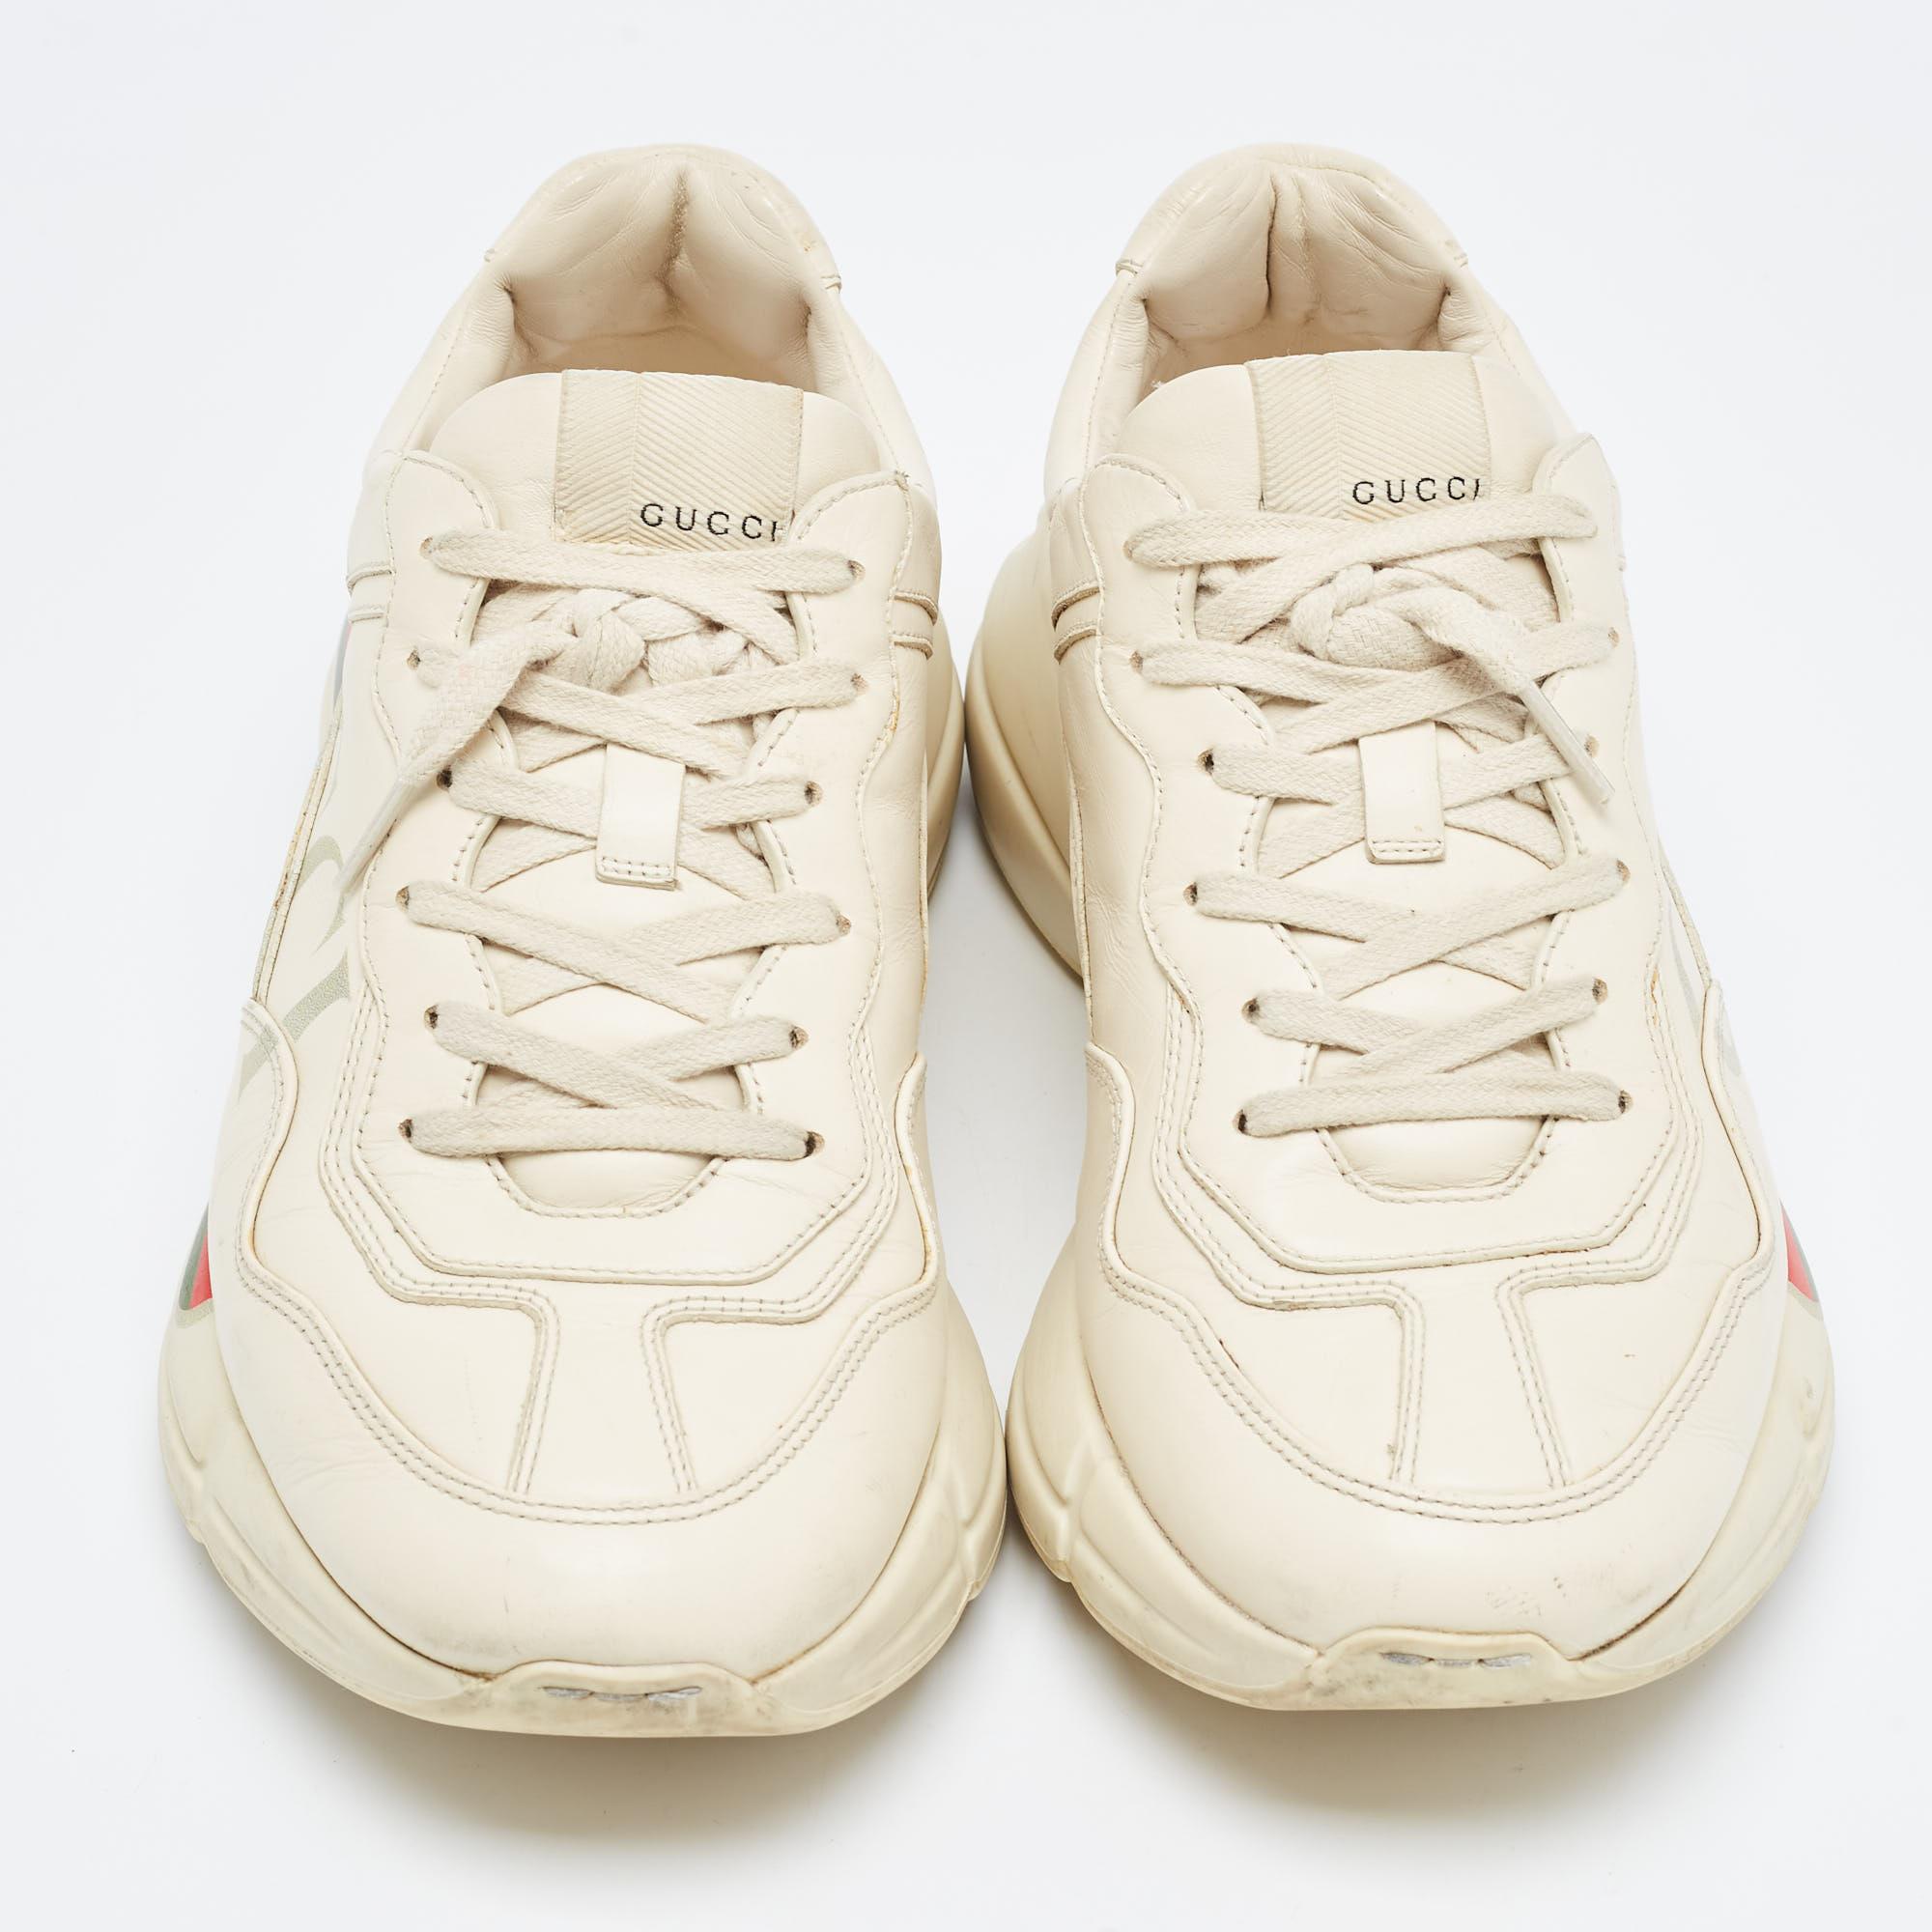 Give your outfit a luxe update with this pair of Gucci sneakers. The shoes are sewn perfectly to help you make a statement in them for a long time.

